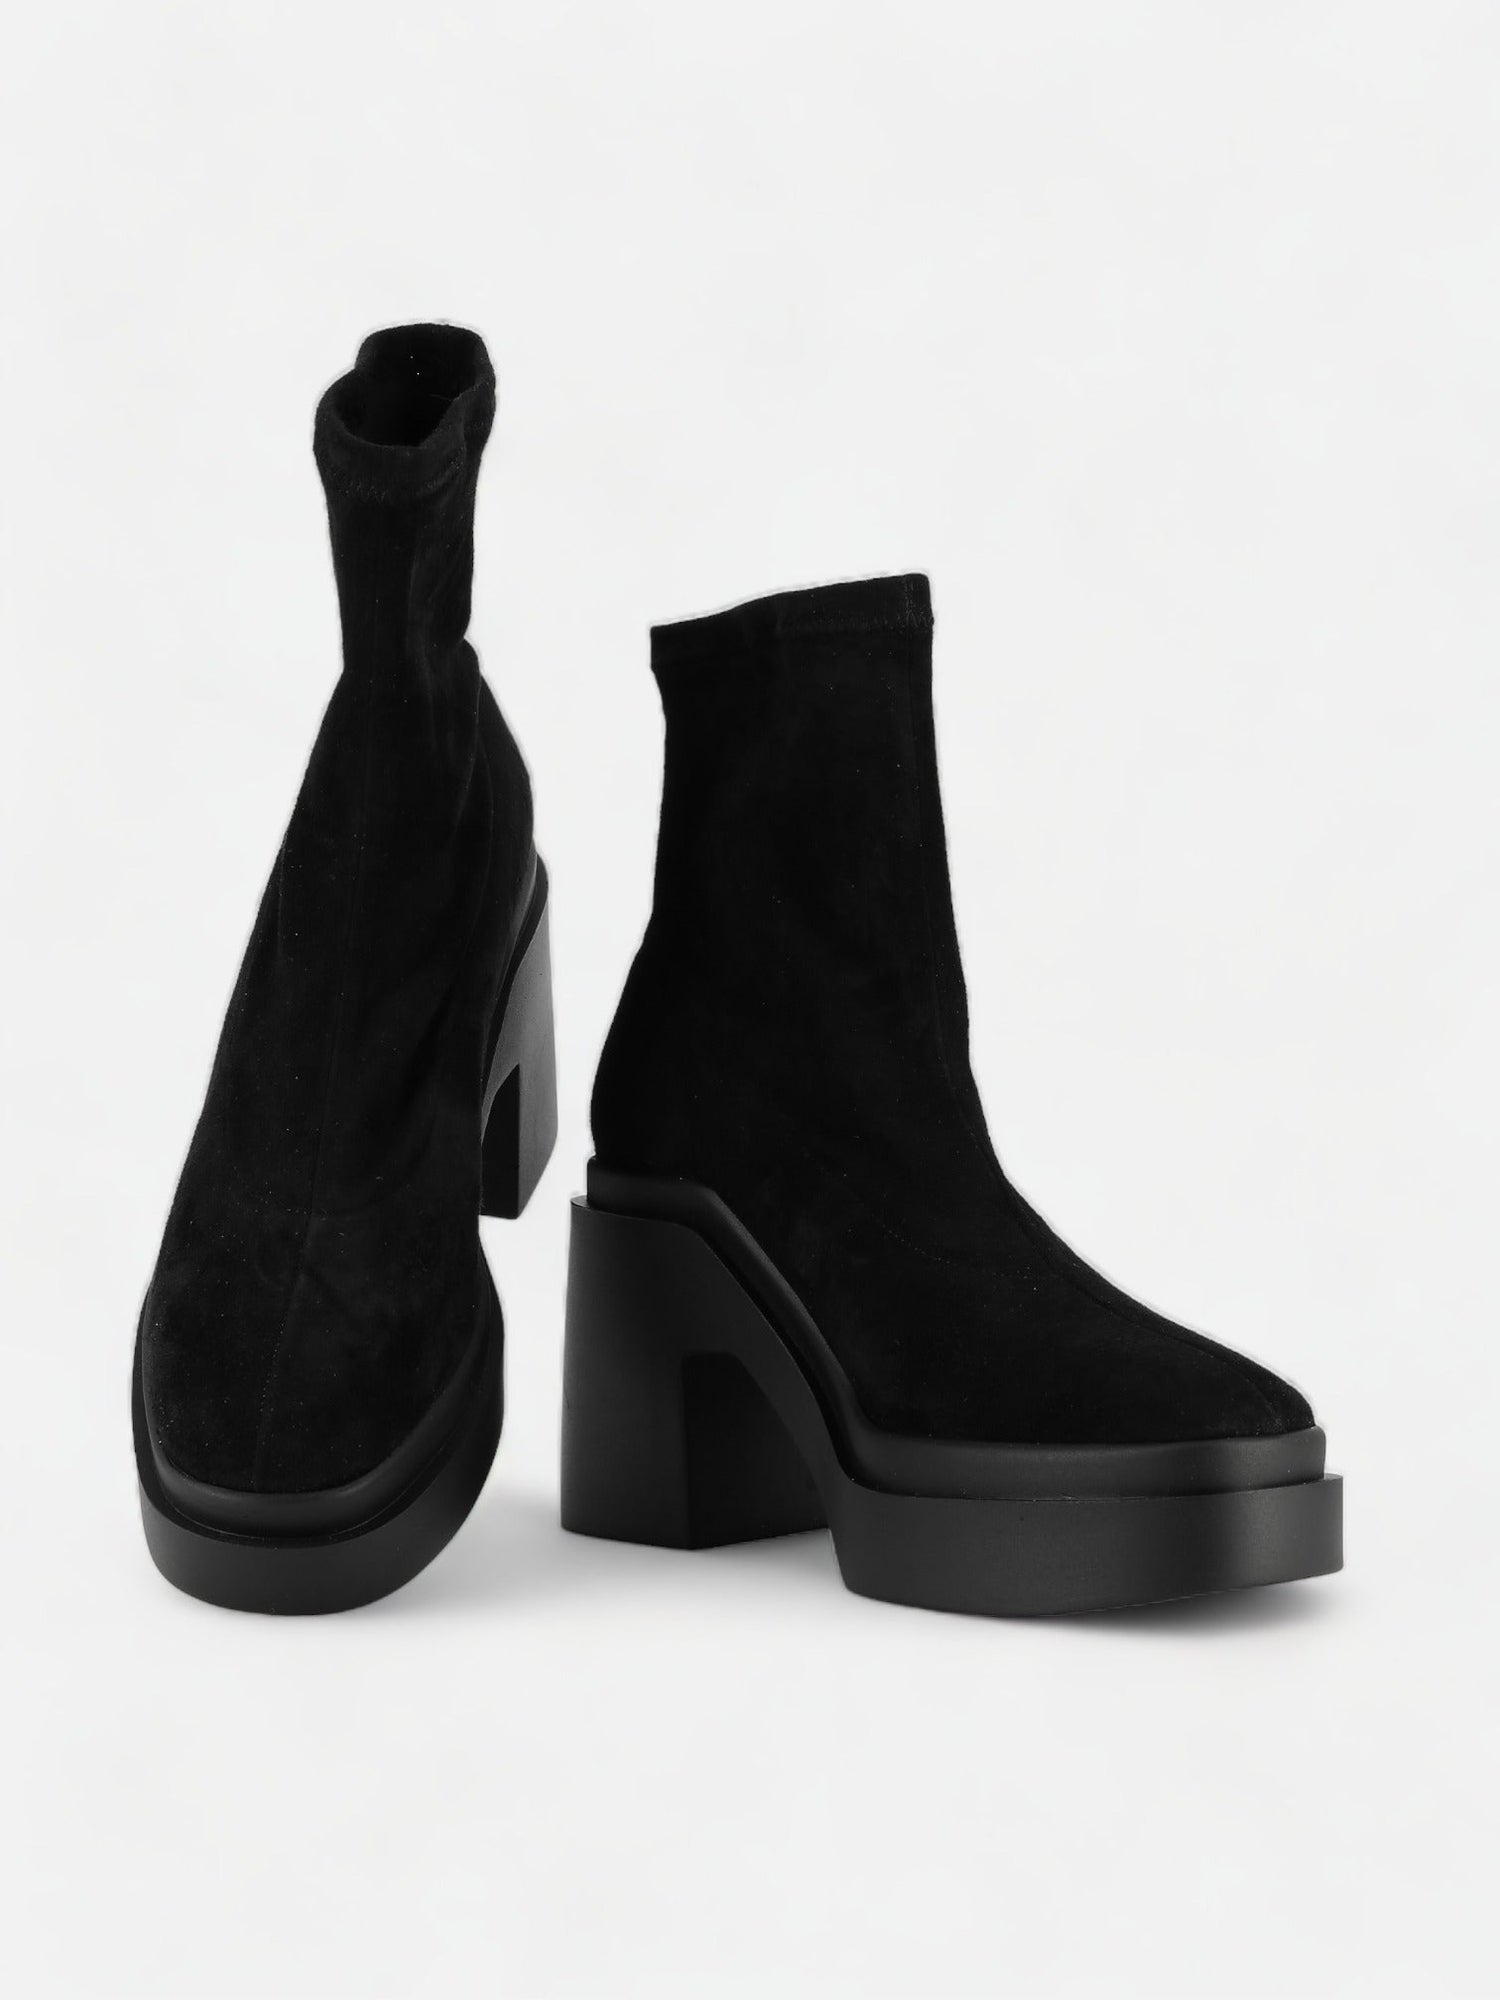 ANKLE BOOTS - NINA ankle boots, suede leather black - 3606063819527 - Clergerie Paris - Europe